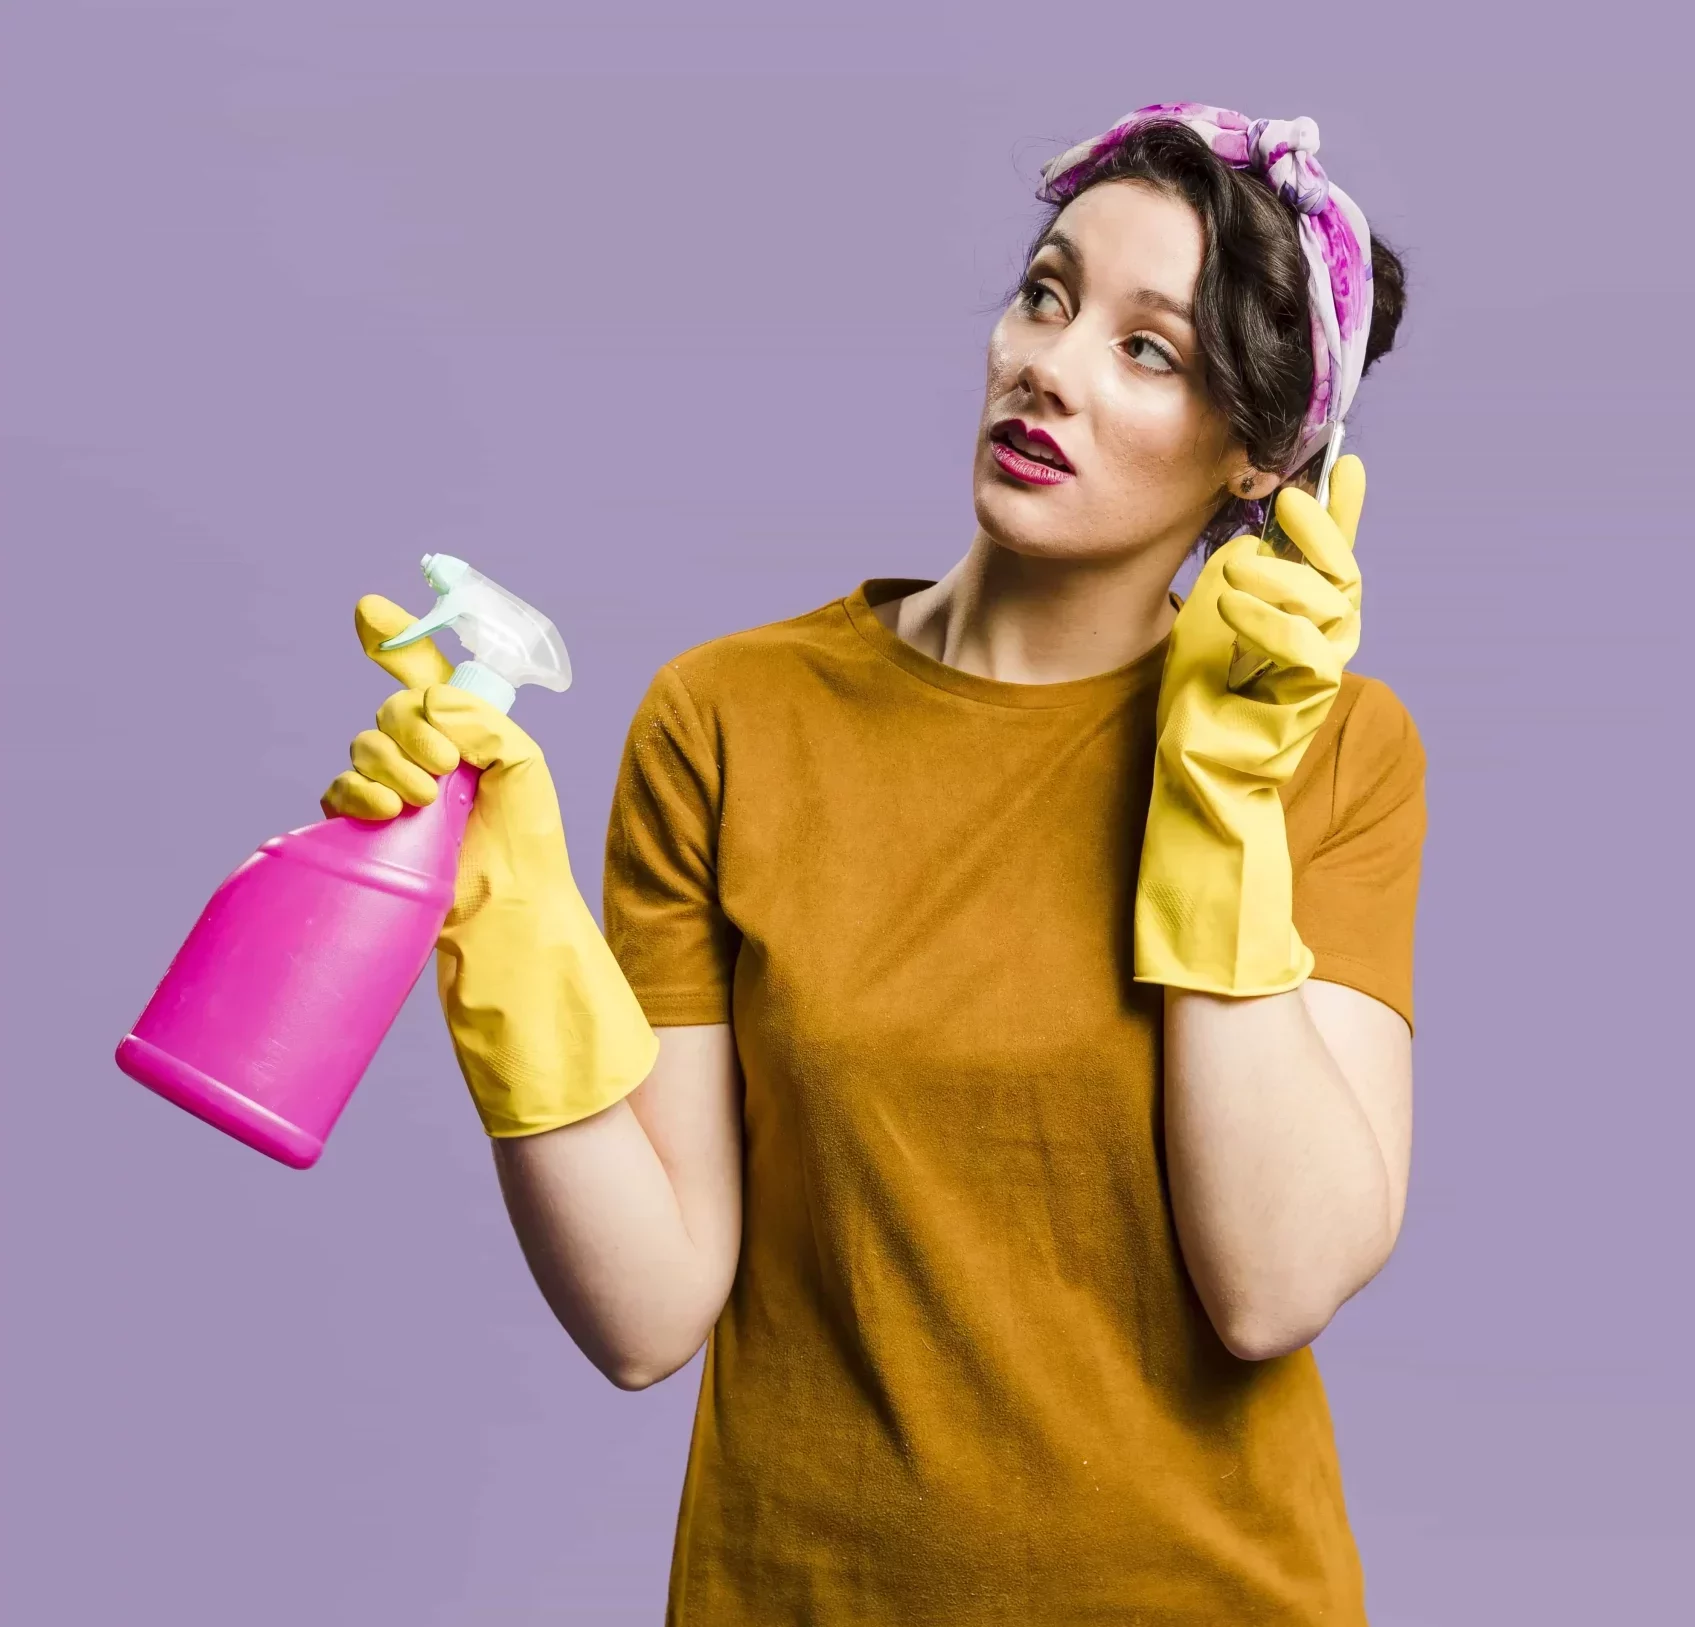 woman wearing a bandana and cleaning gloves holding a cleanser by one hand while talking with her phone